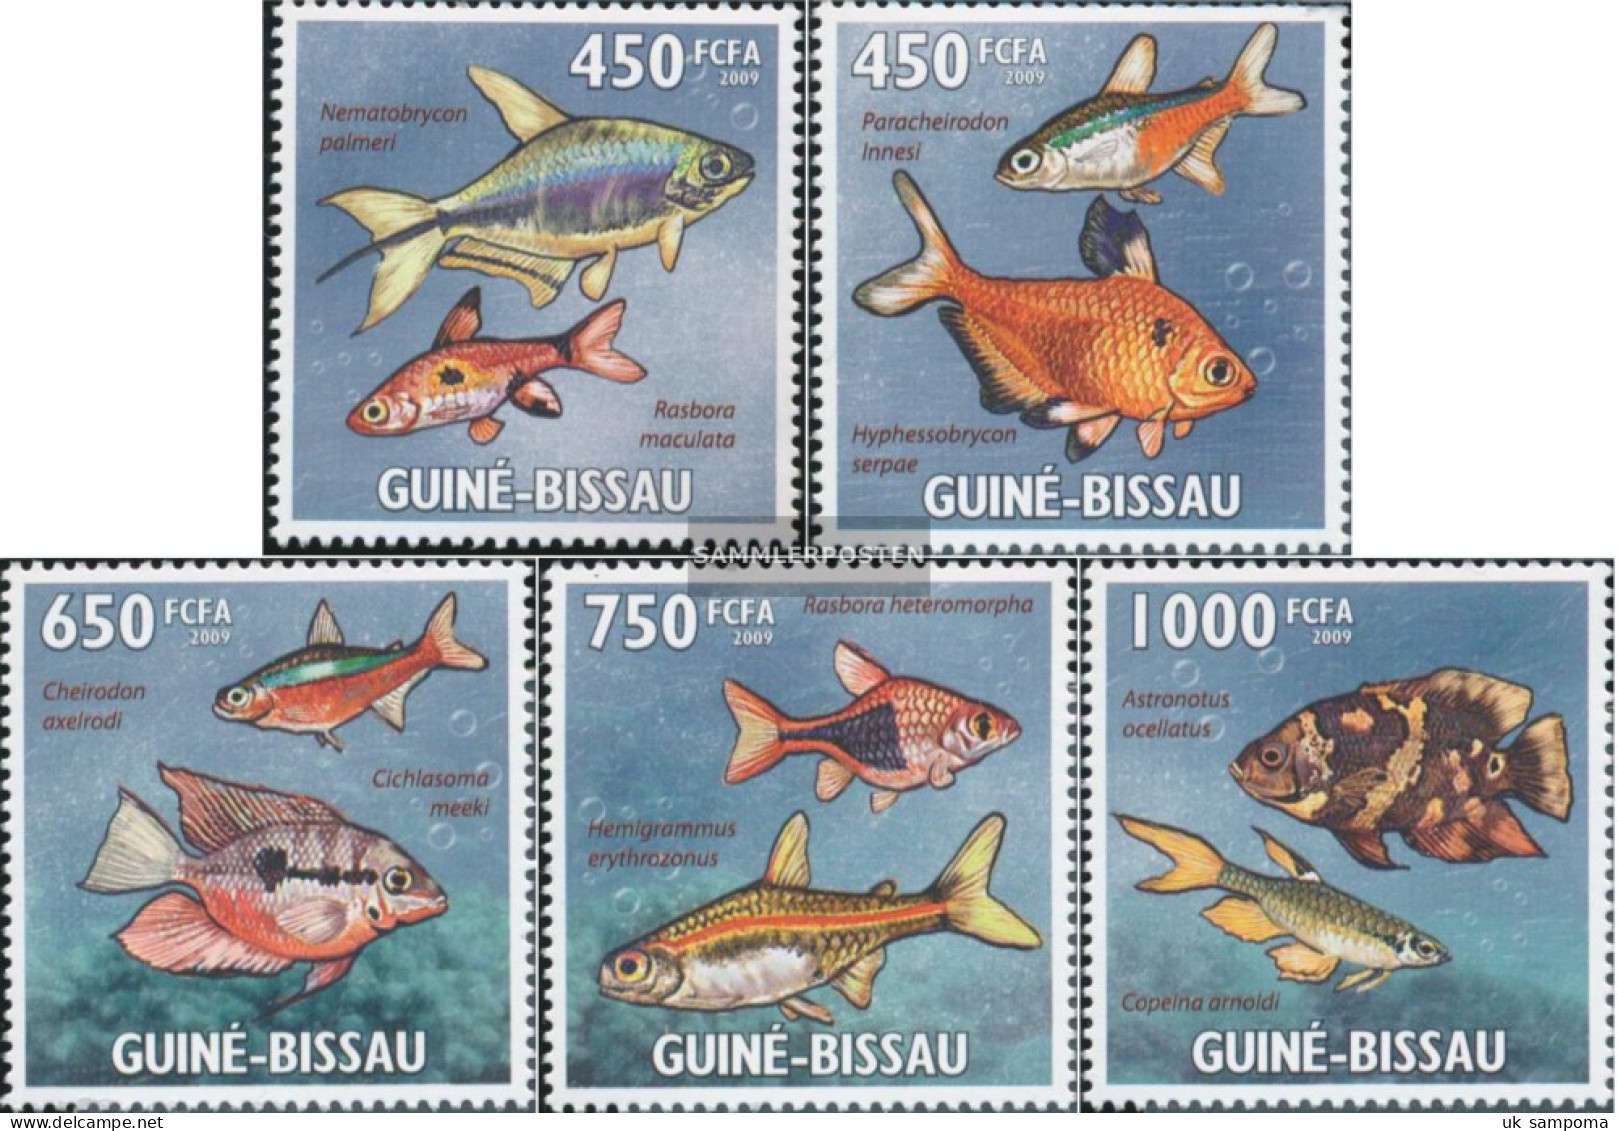 Guinea-Bissau 4468-4472 (complete. Issue) Unmounted Mint / Never Hinged 2009 Tropical Fish - Guinea-Bissau